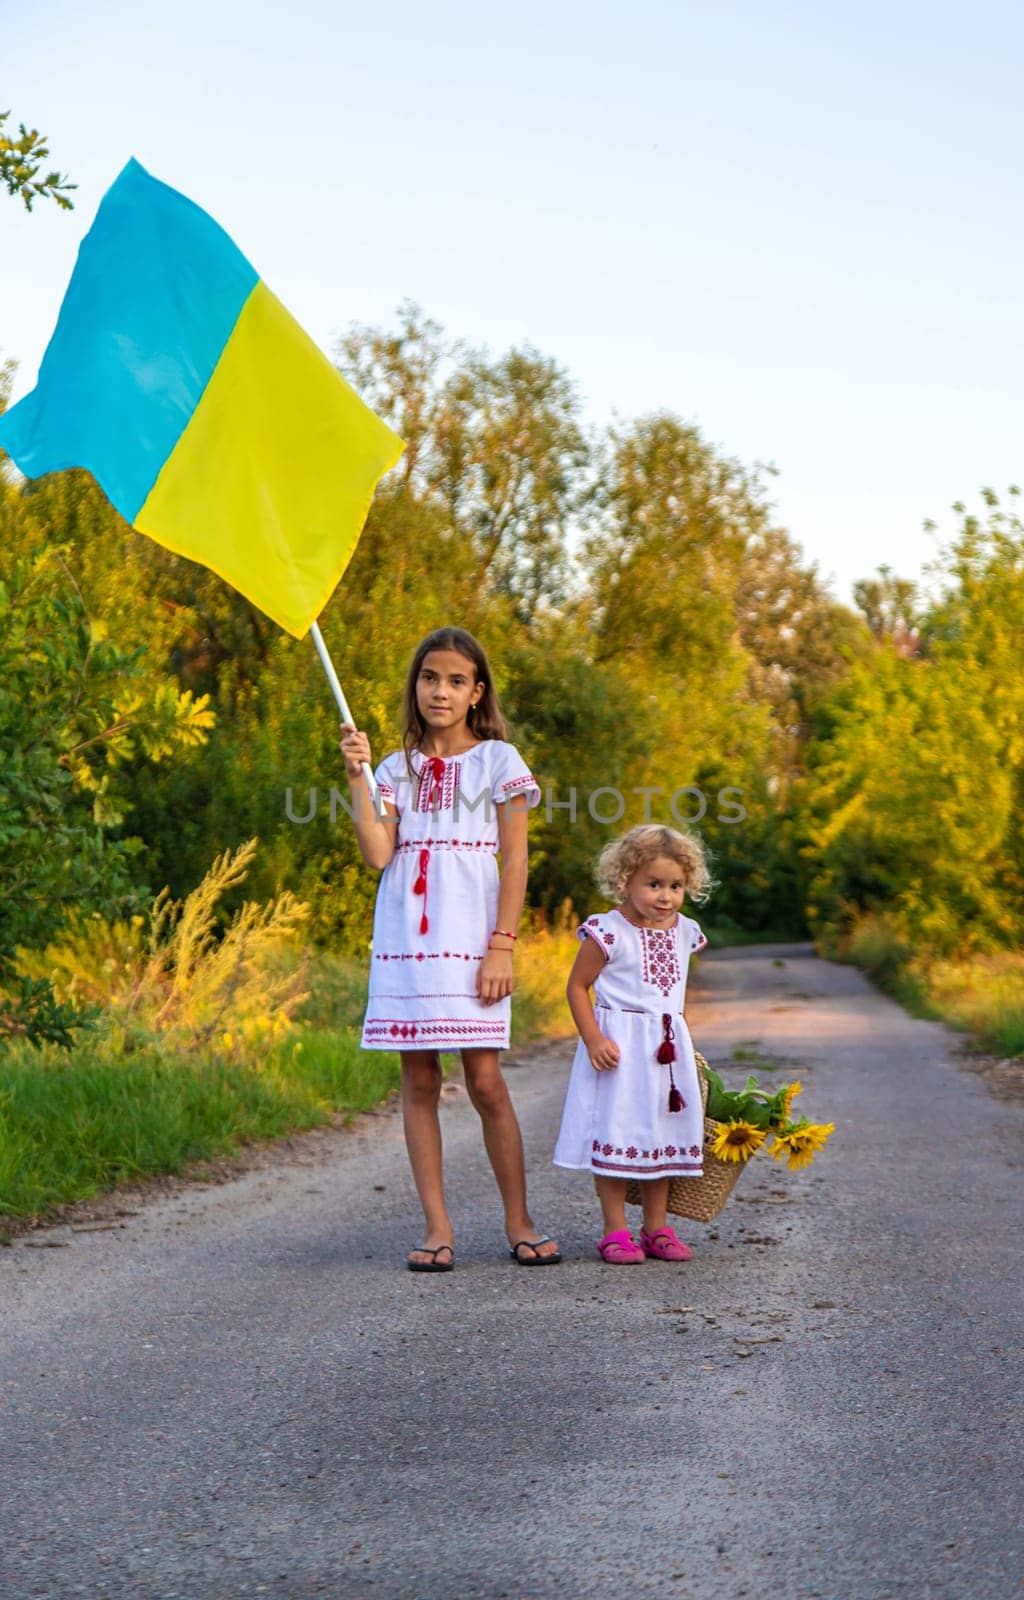 Child with the flag of Ukraine. Selective focus. Nature.